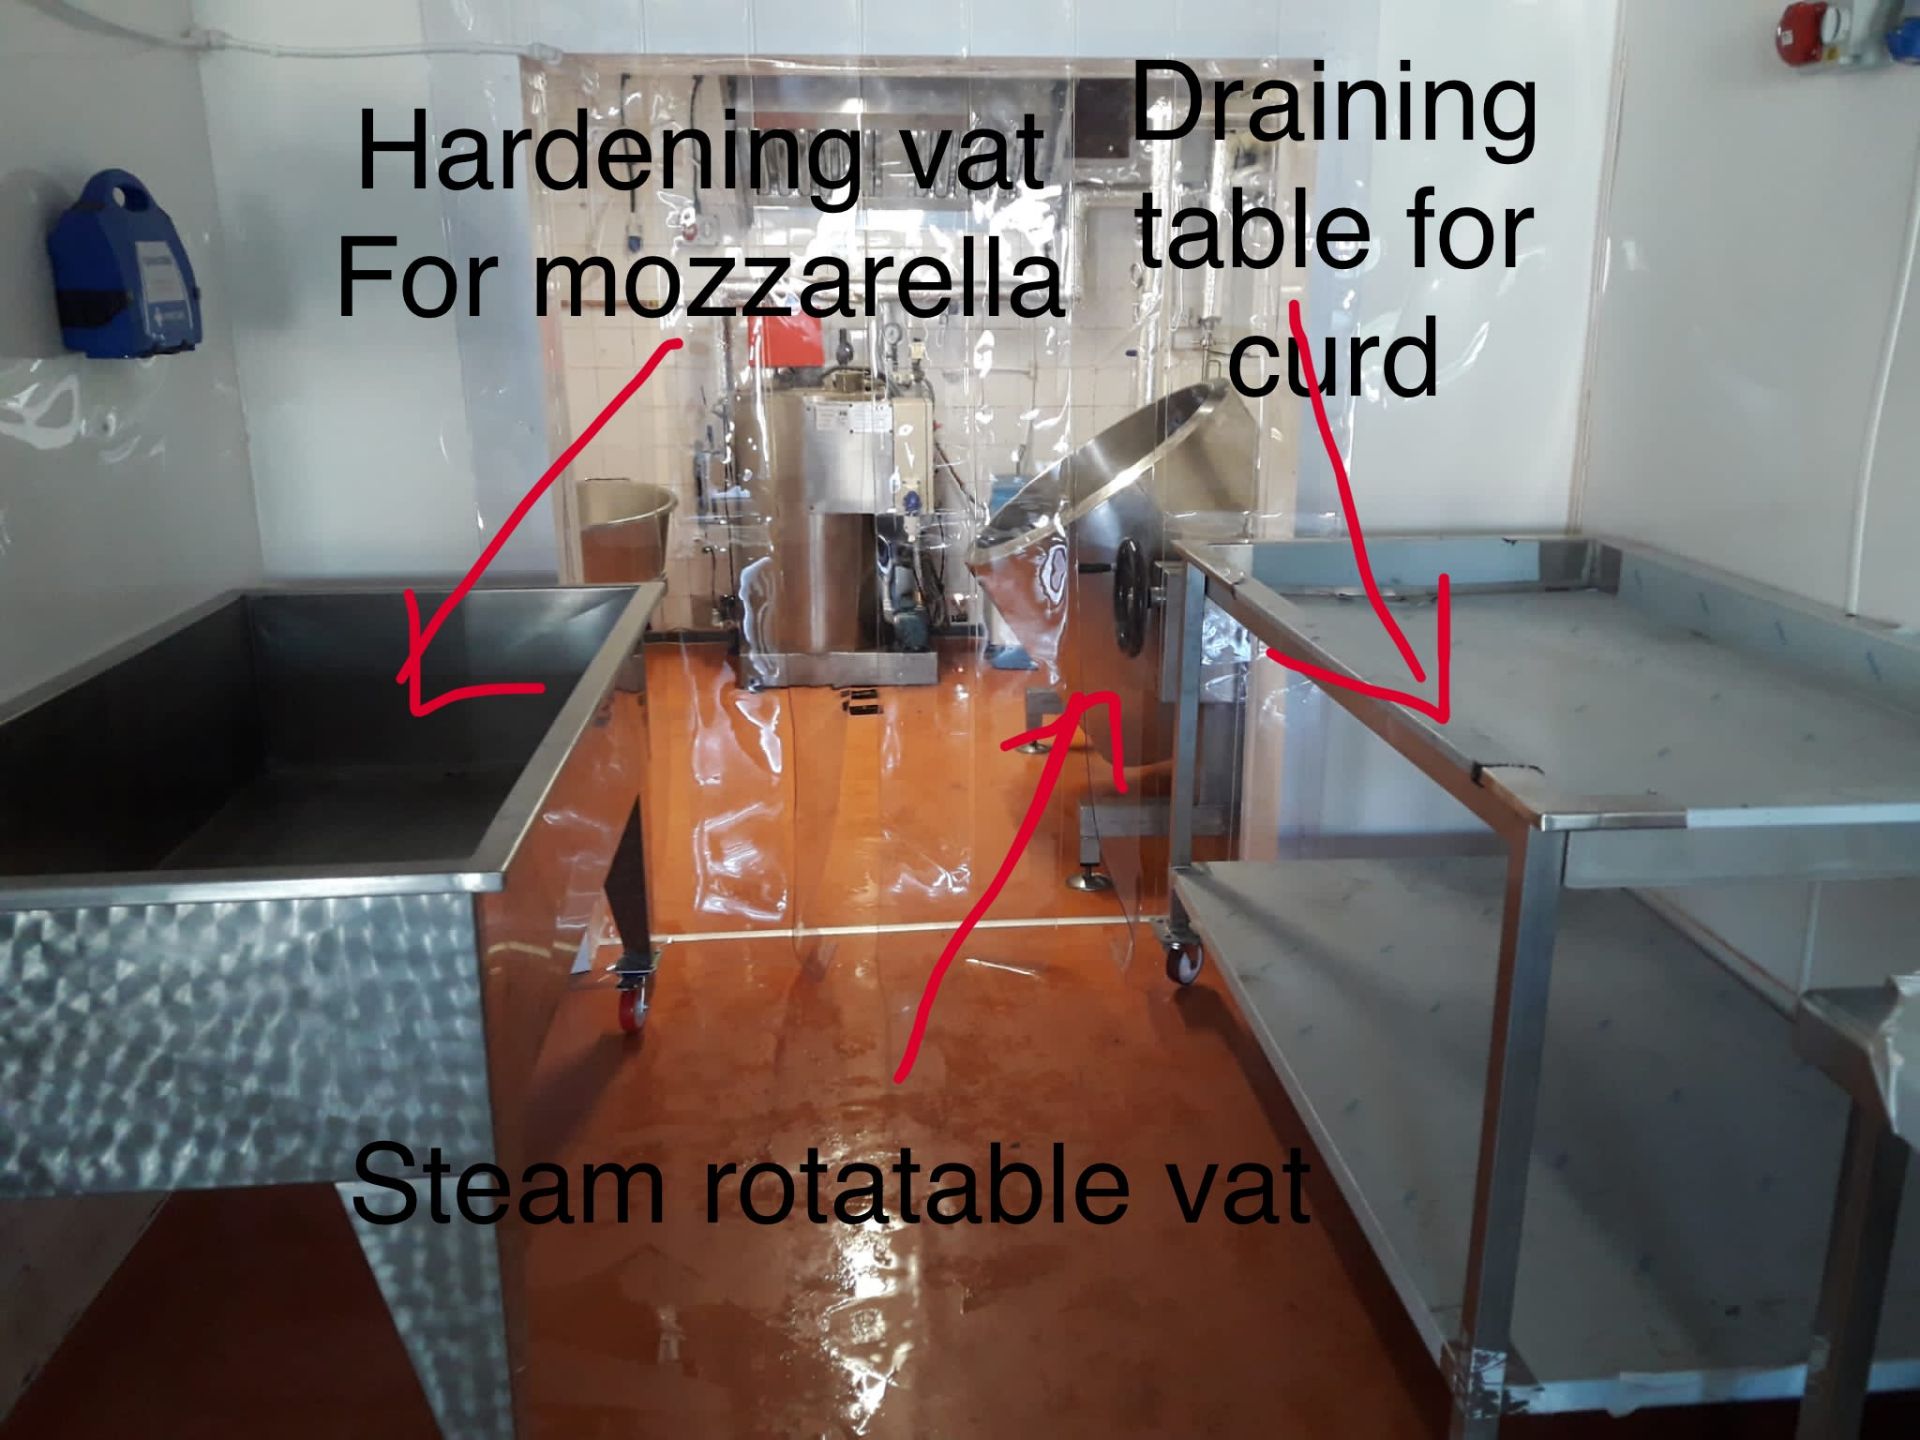 draining table for curd, Hardening vats for mozzarella